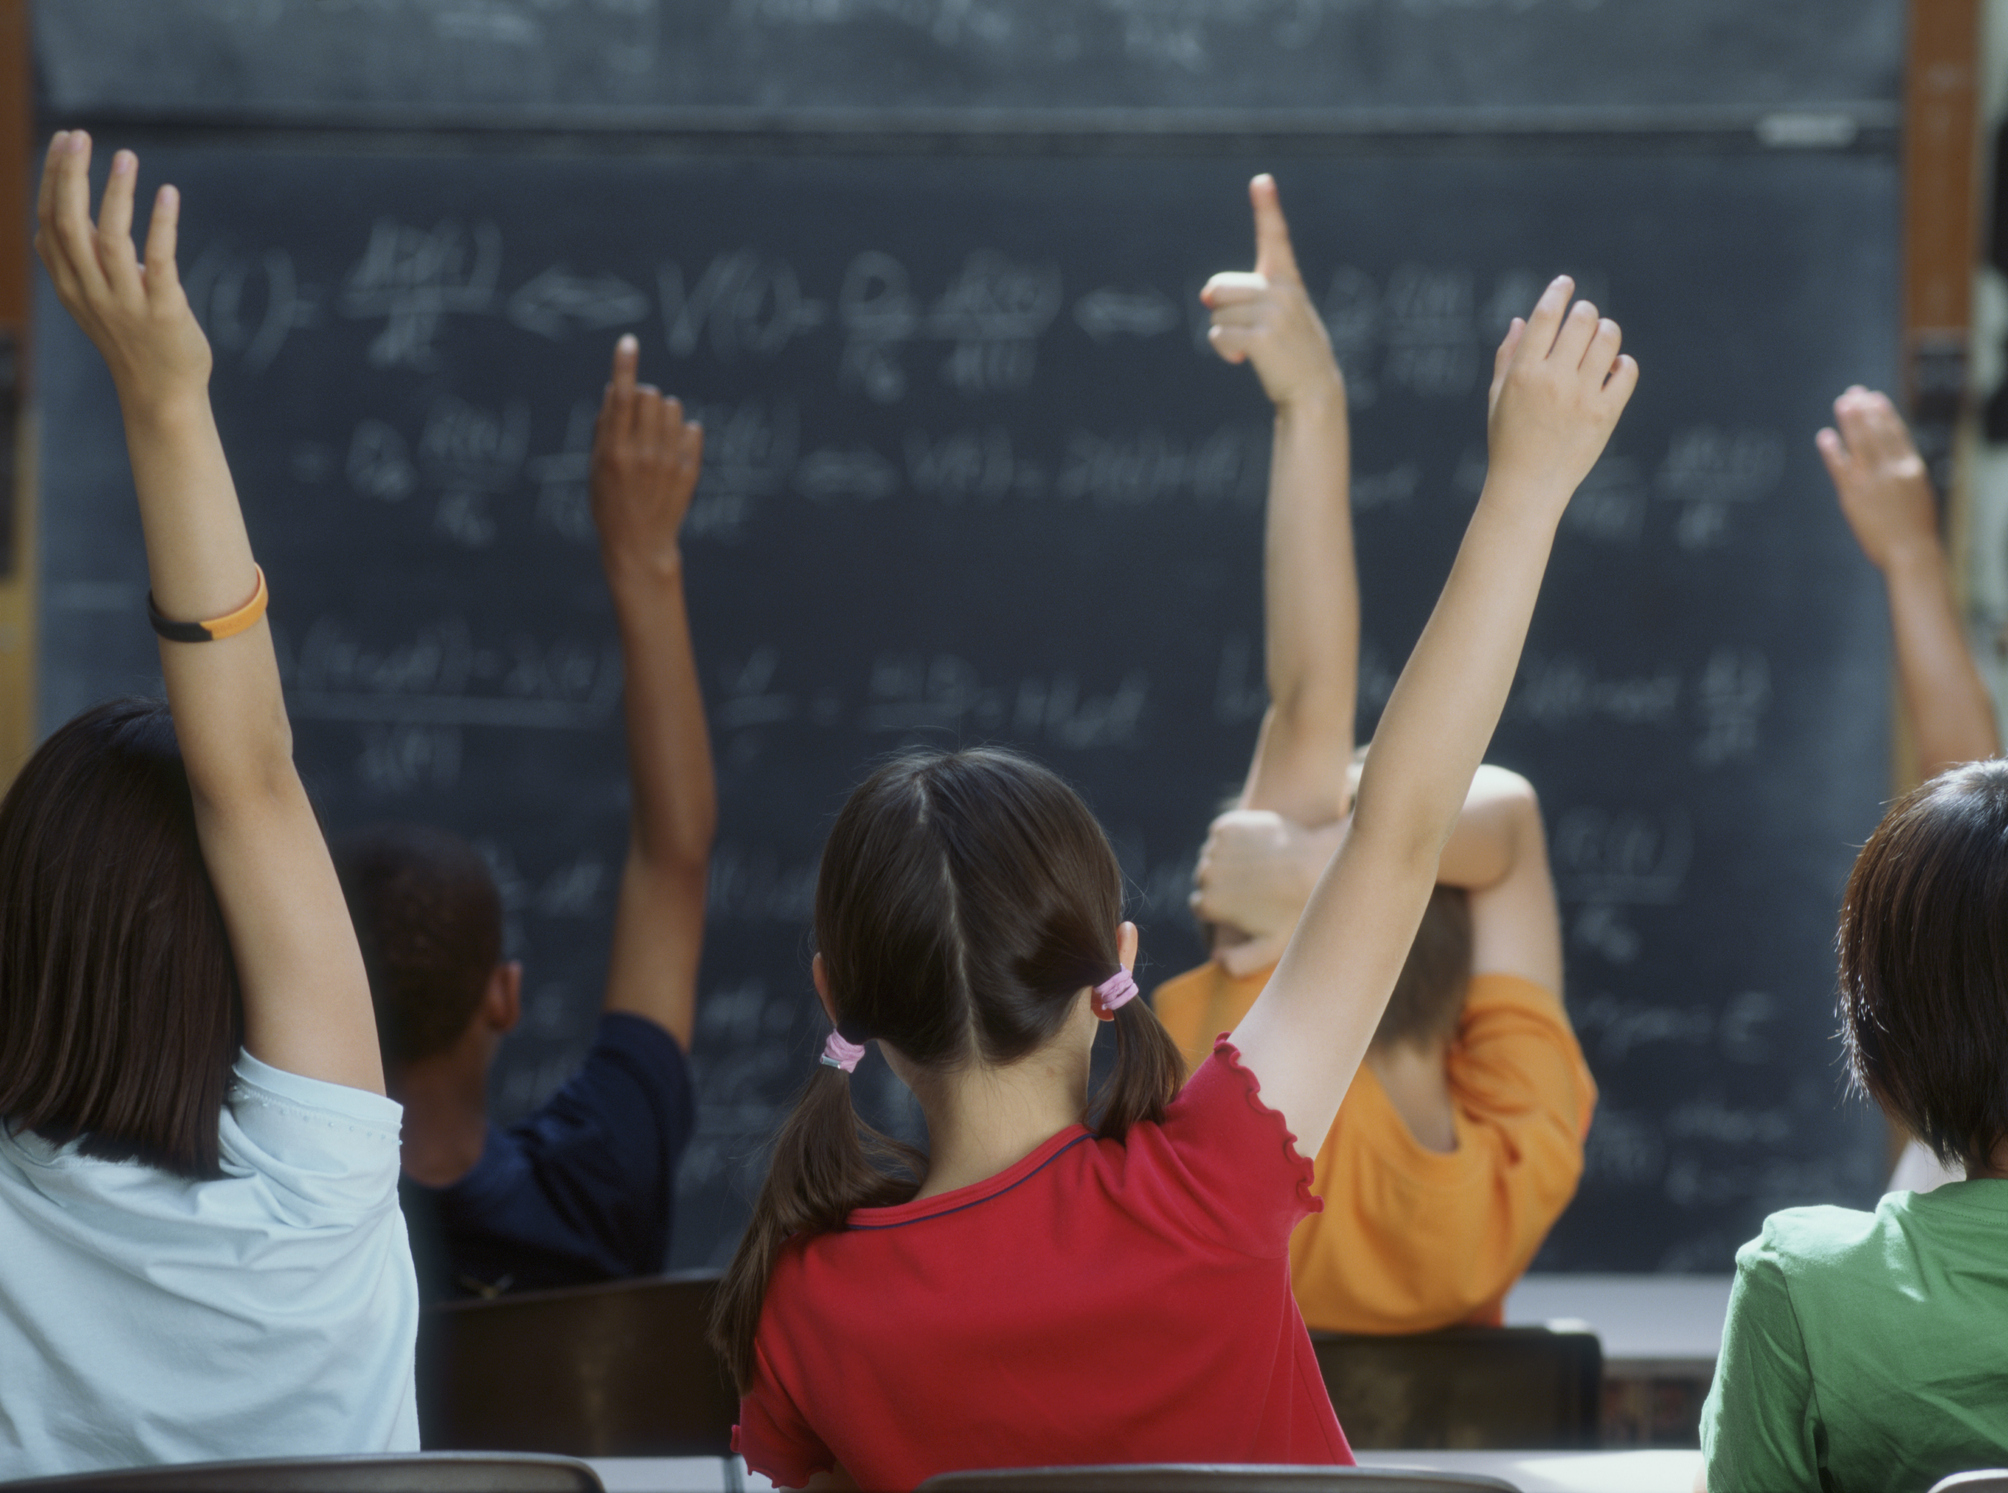 Middle schoolers raising their hands to answer a question in class. (Getty Images)